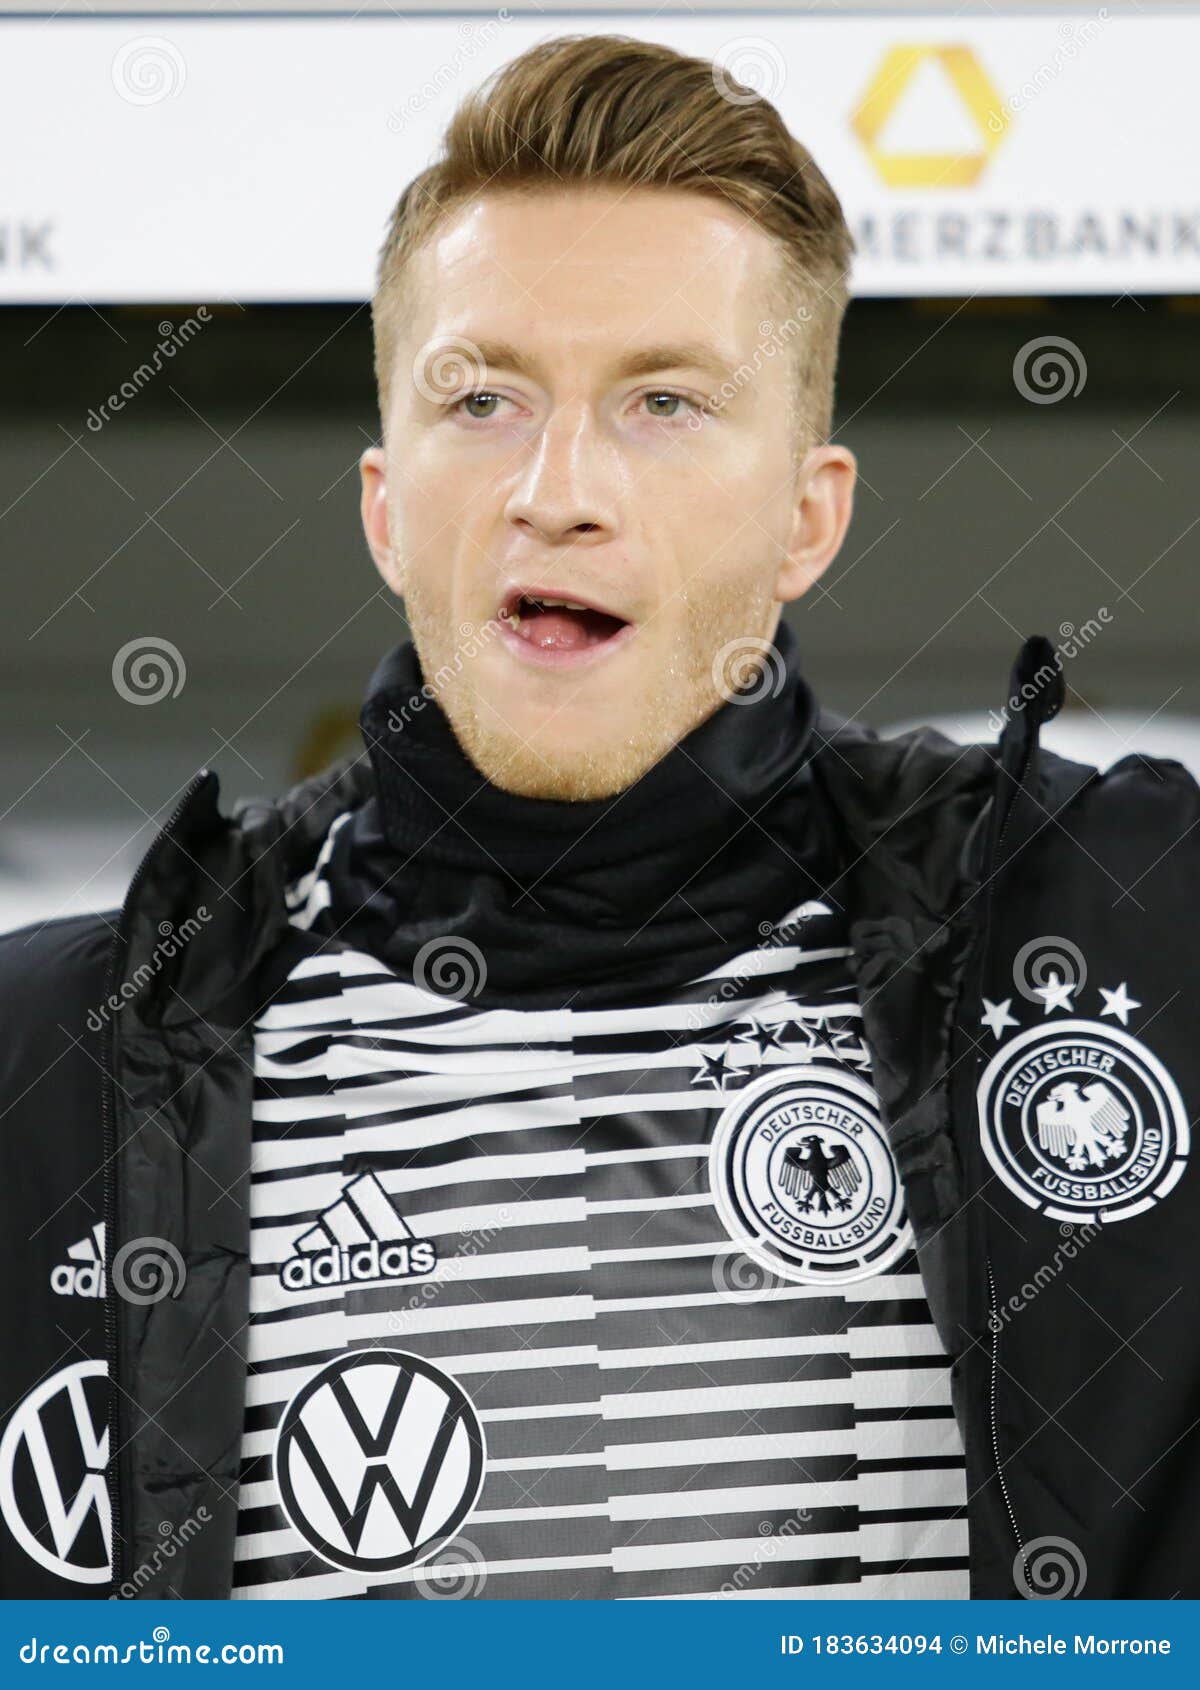 Pin by Gustavo Lozano on Marco reus | Reus hairstyle, Football hairstyles, Marco  reus